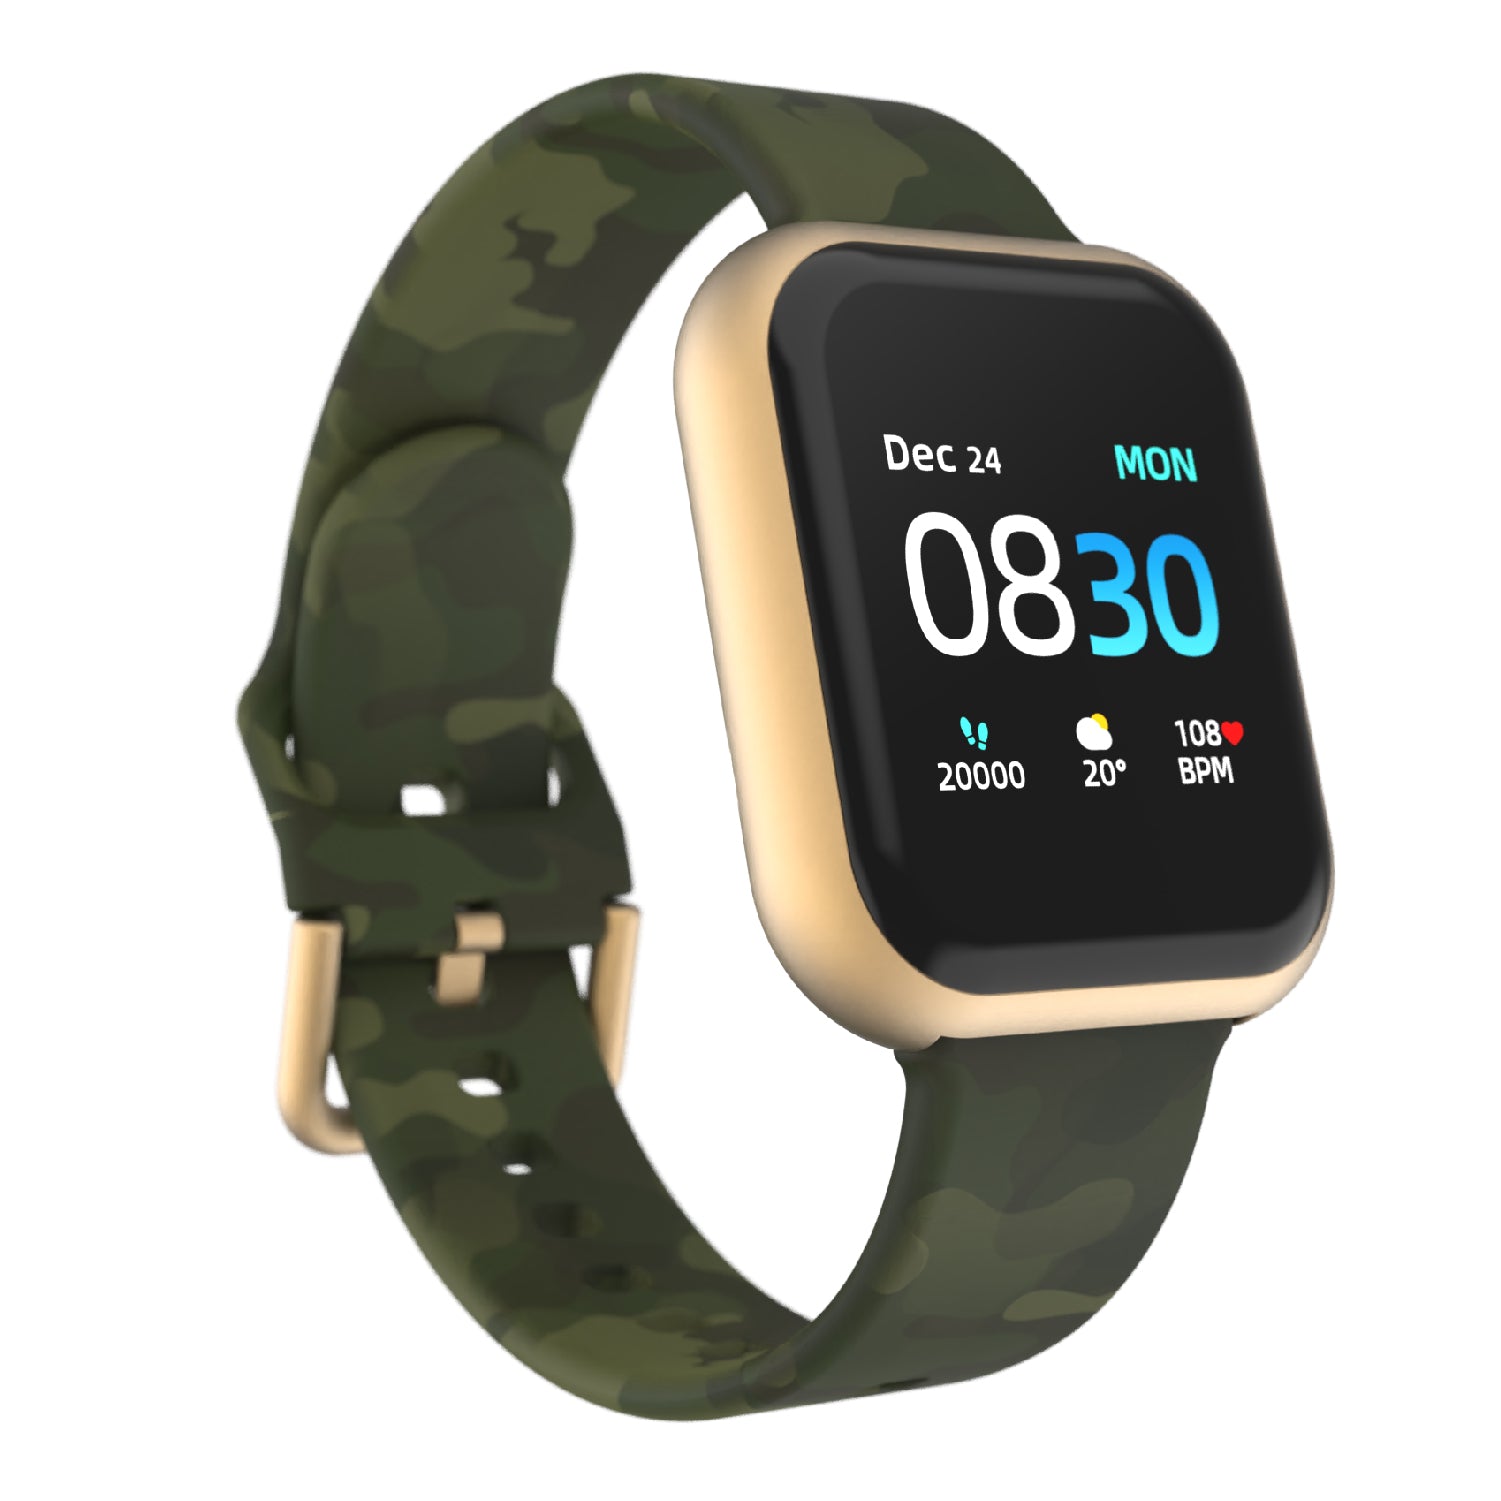 iTouch Air 3 Smartwatch in Gold with Beige StrapiTouch Air 3 Smartwatch in Gold with Green Camo Strap